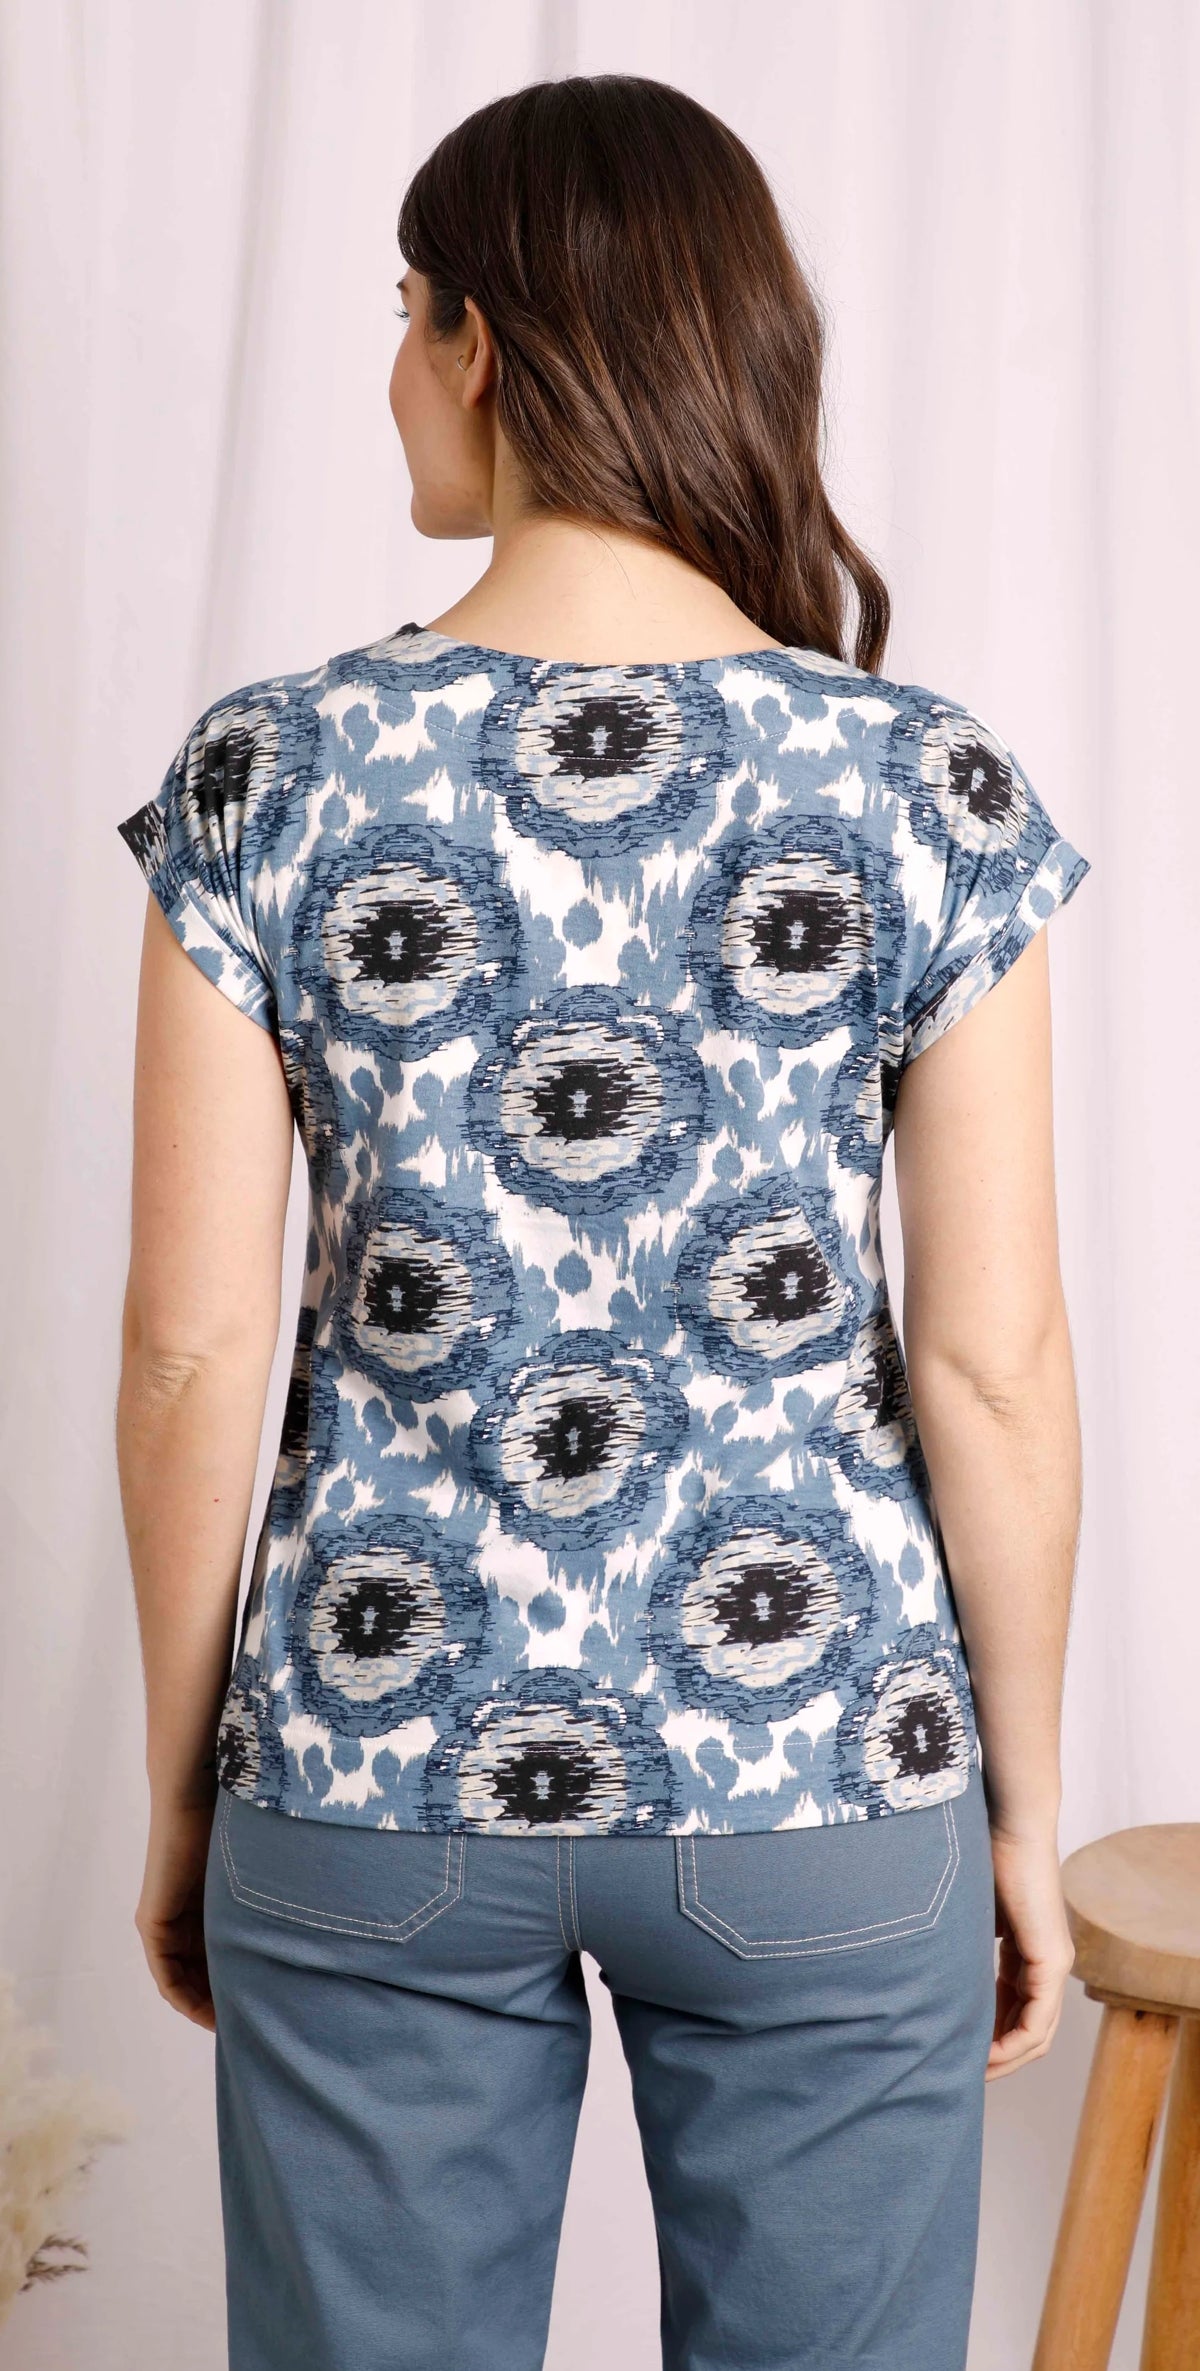 Women's Paw Paw short sleeve tee from Weird Fish in Pale Denim Blue with an abstract circular print.